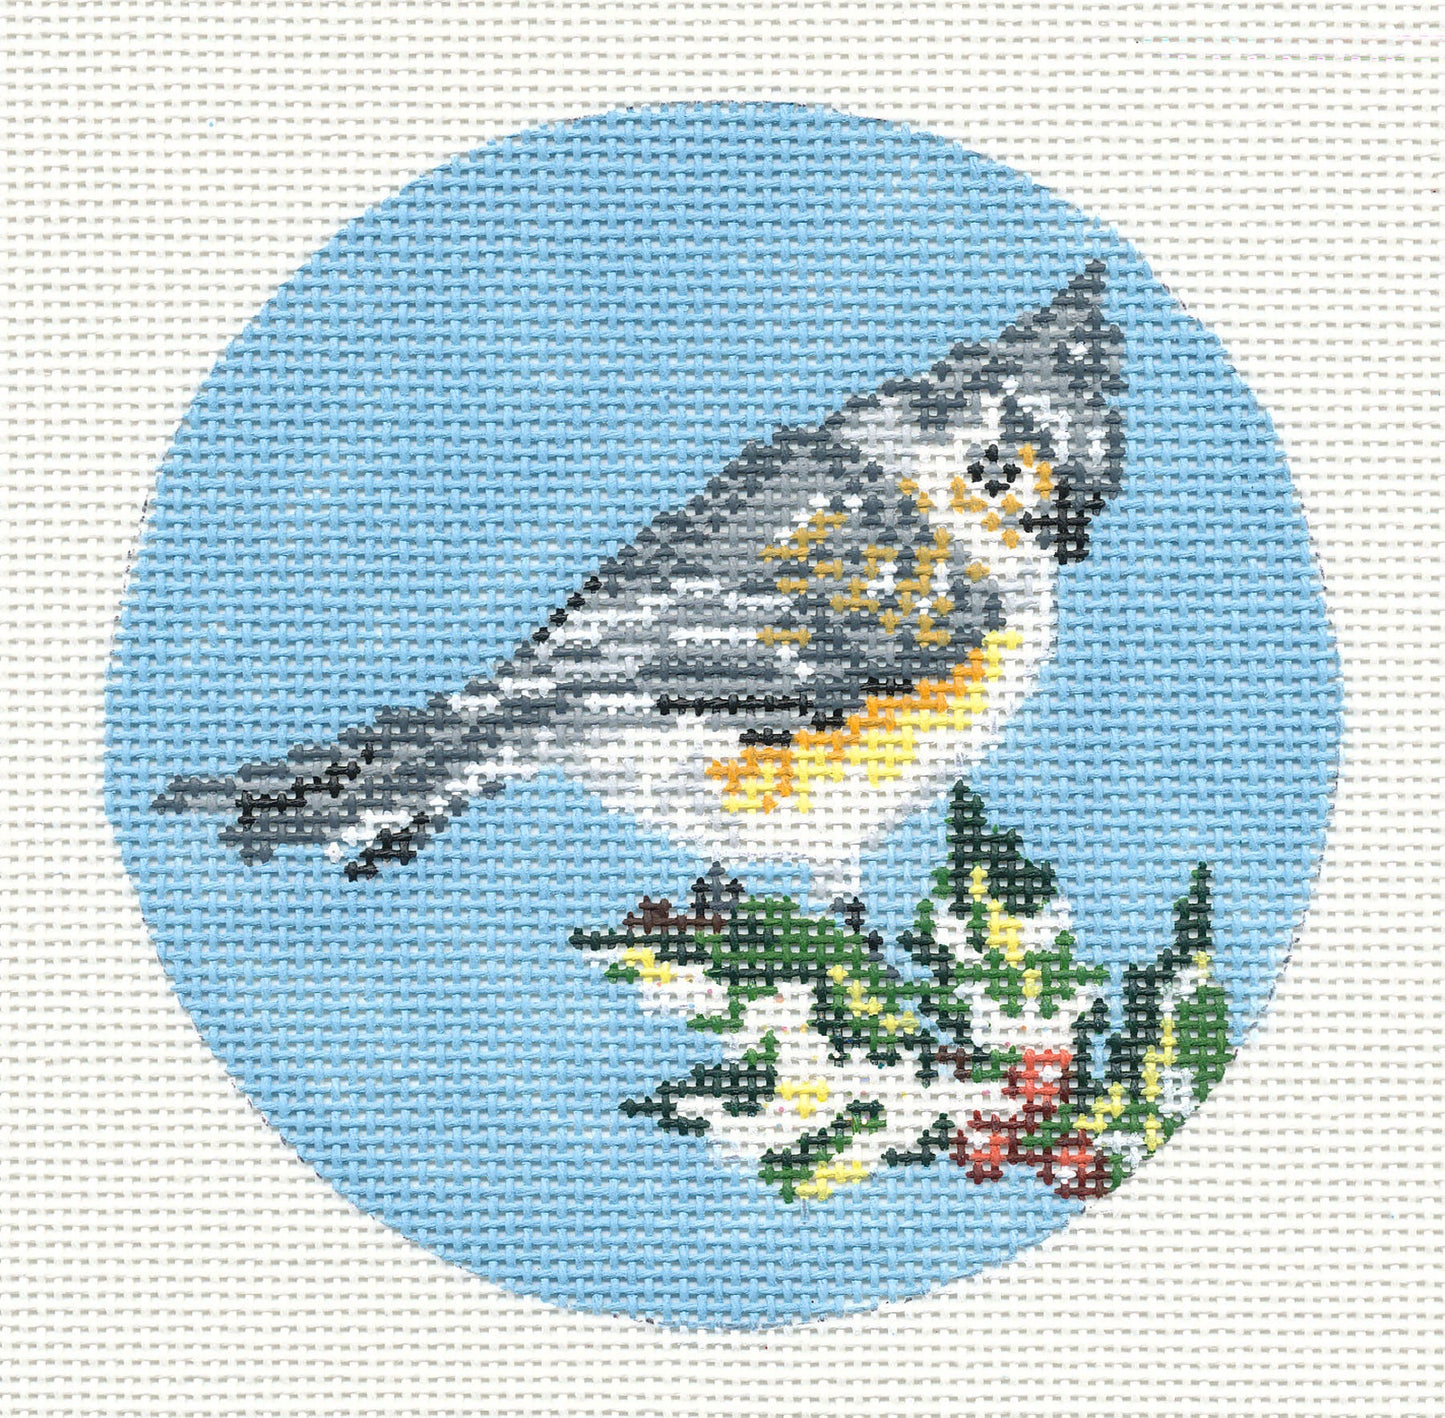 Round~4" Tufted Titmouse Bird Ornament handpainted Needlepoint Canvas~by Needle Crossings